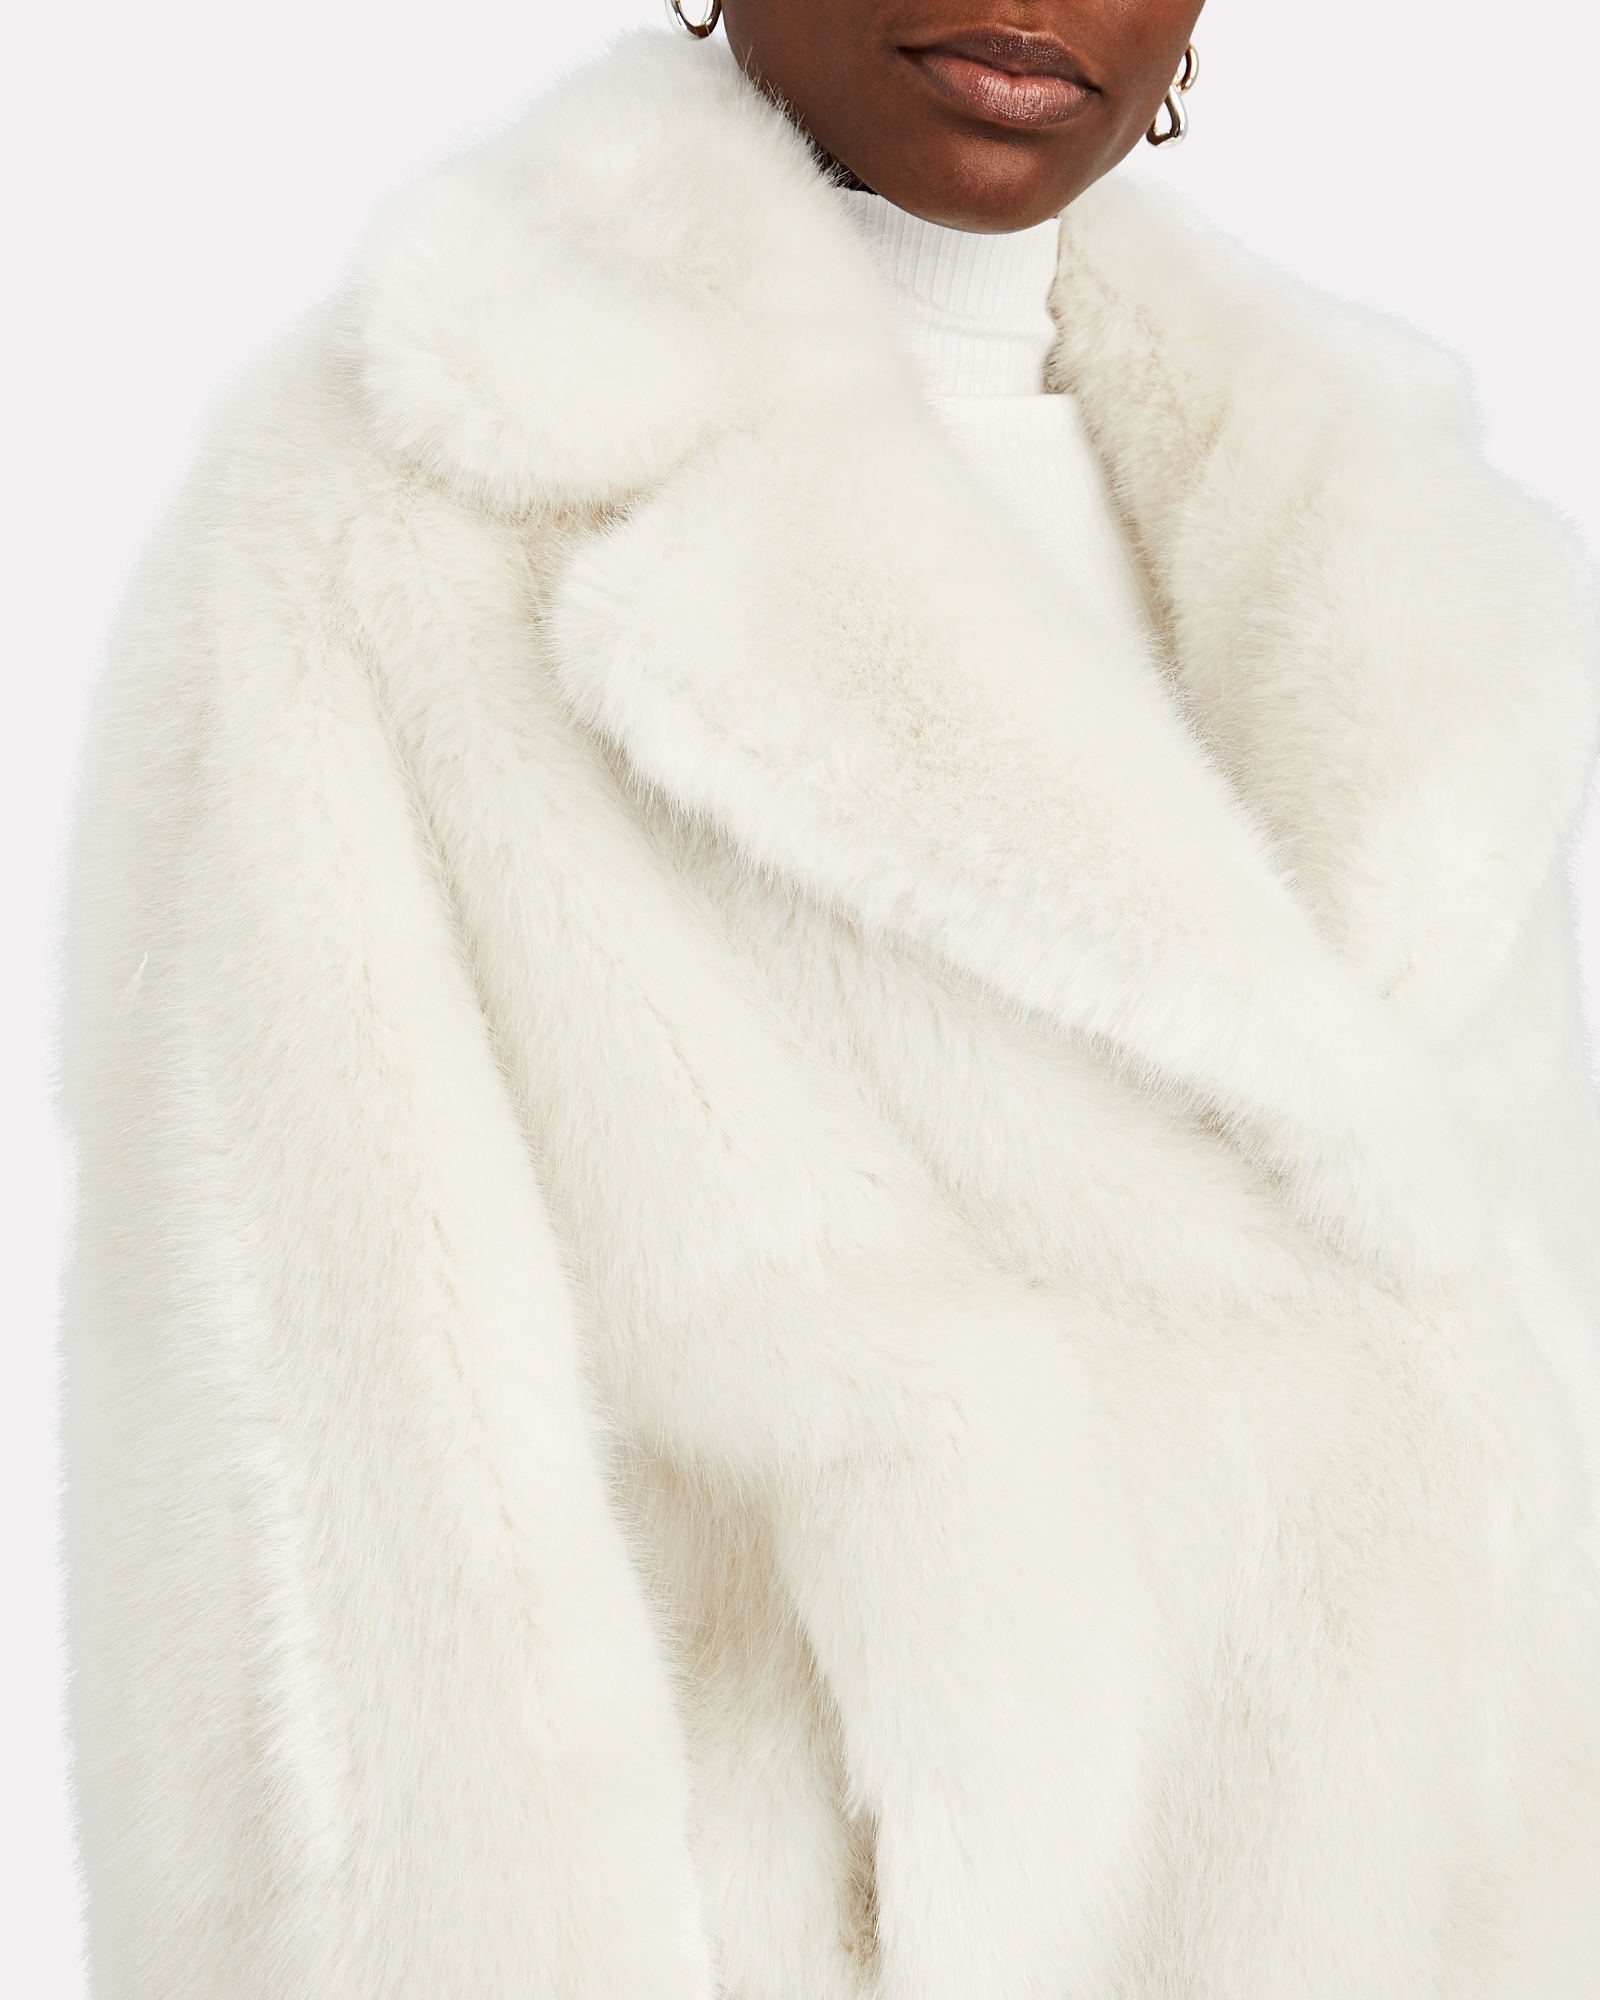 STAND Janet Cropped Faux Fur Jacket | INTERMIX®